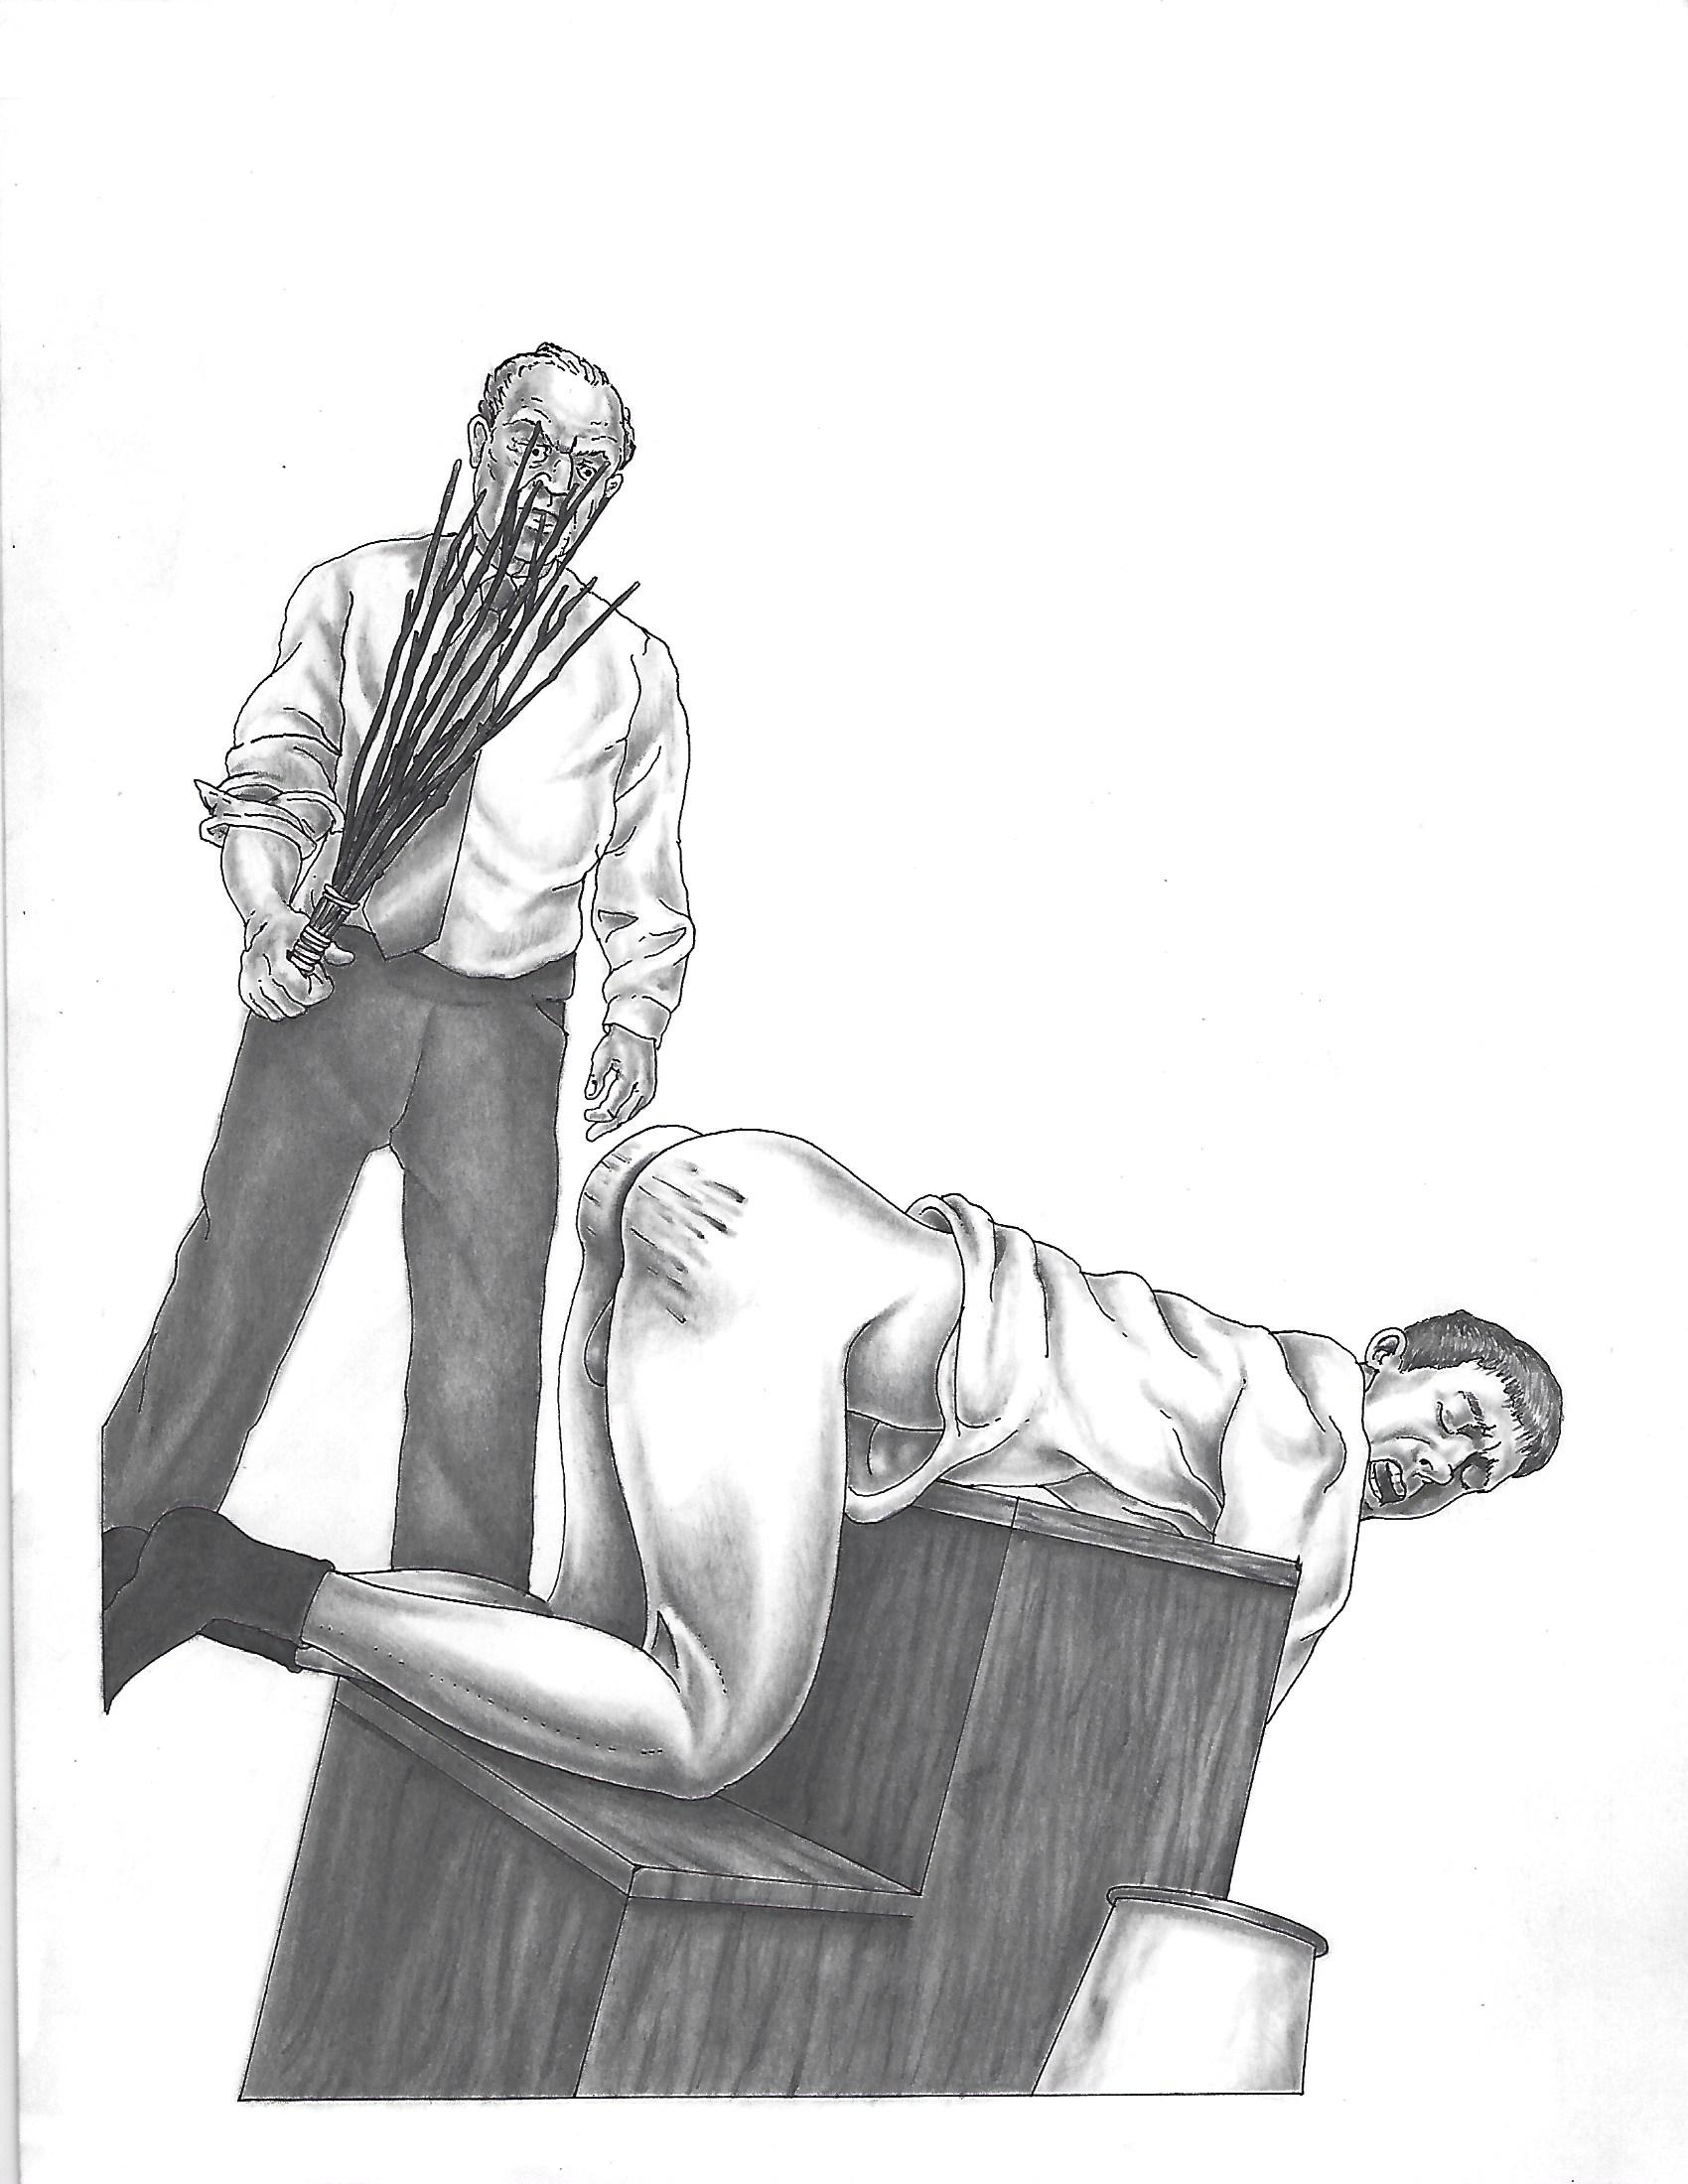 Mmsa male spanking - 🧡 ♺ Compromised Security - Dreams of Spanking.